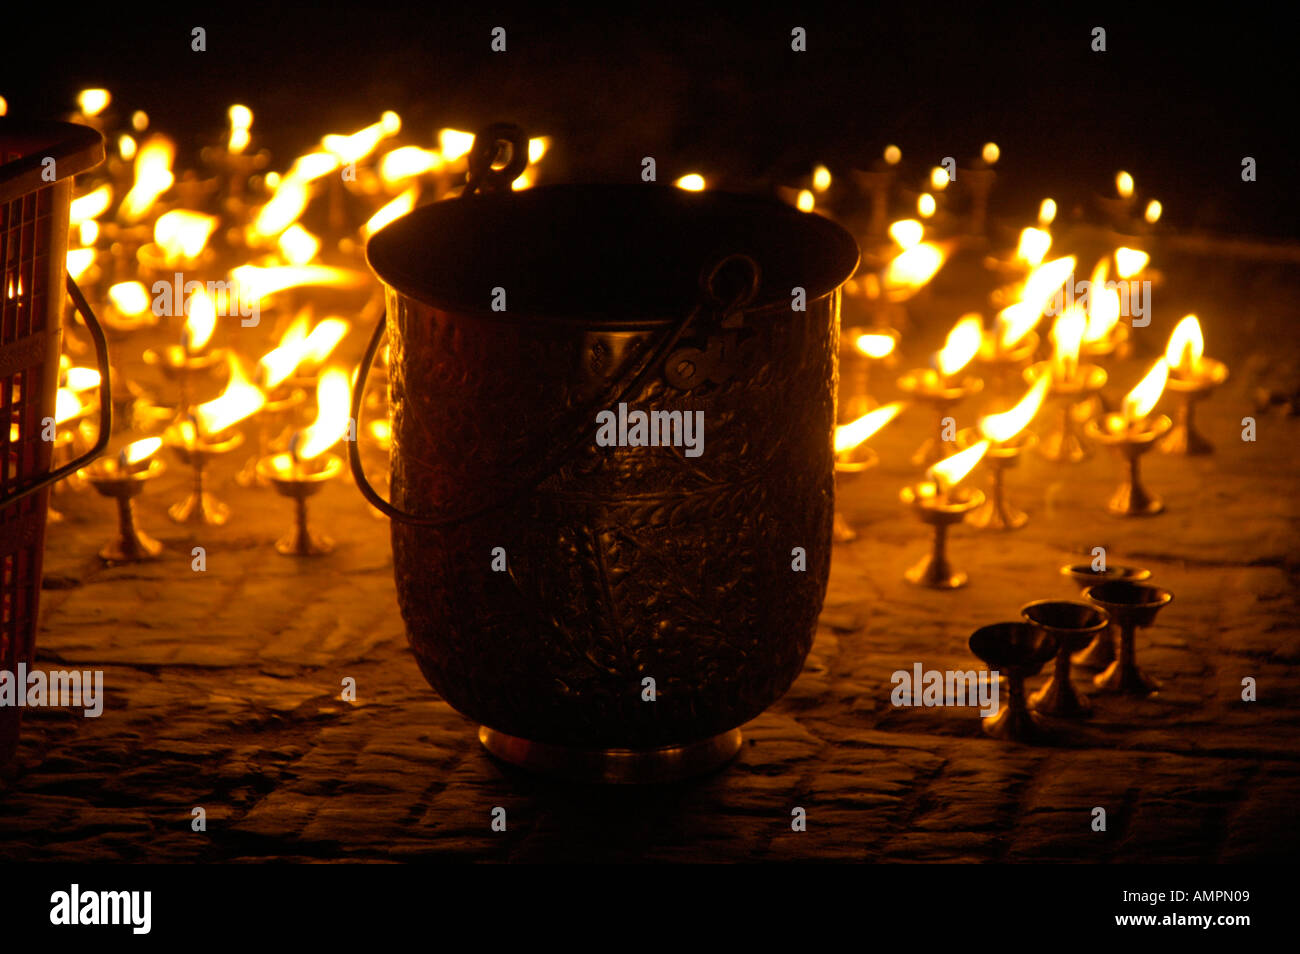 Butter lamps are burning on the ground behind a metal pot at a festival Kathmandu Nepal Stock Photo